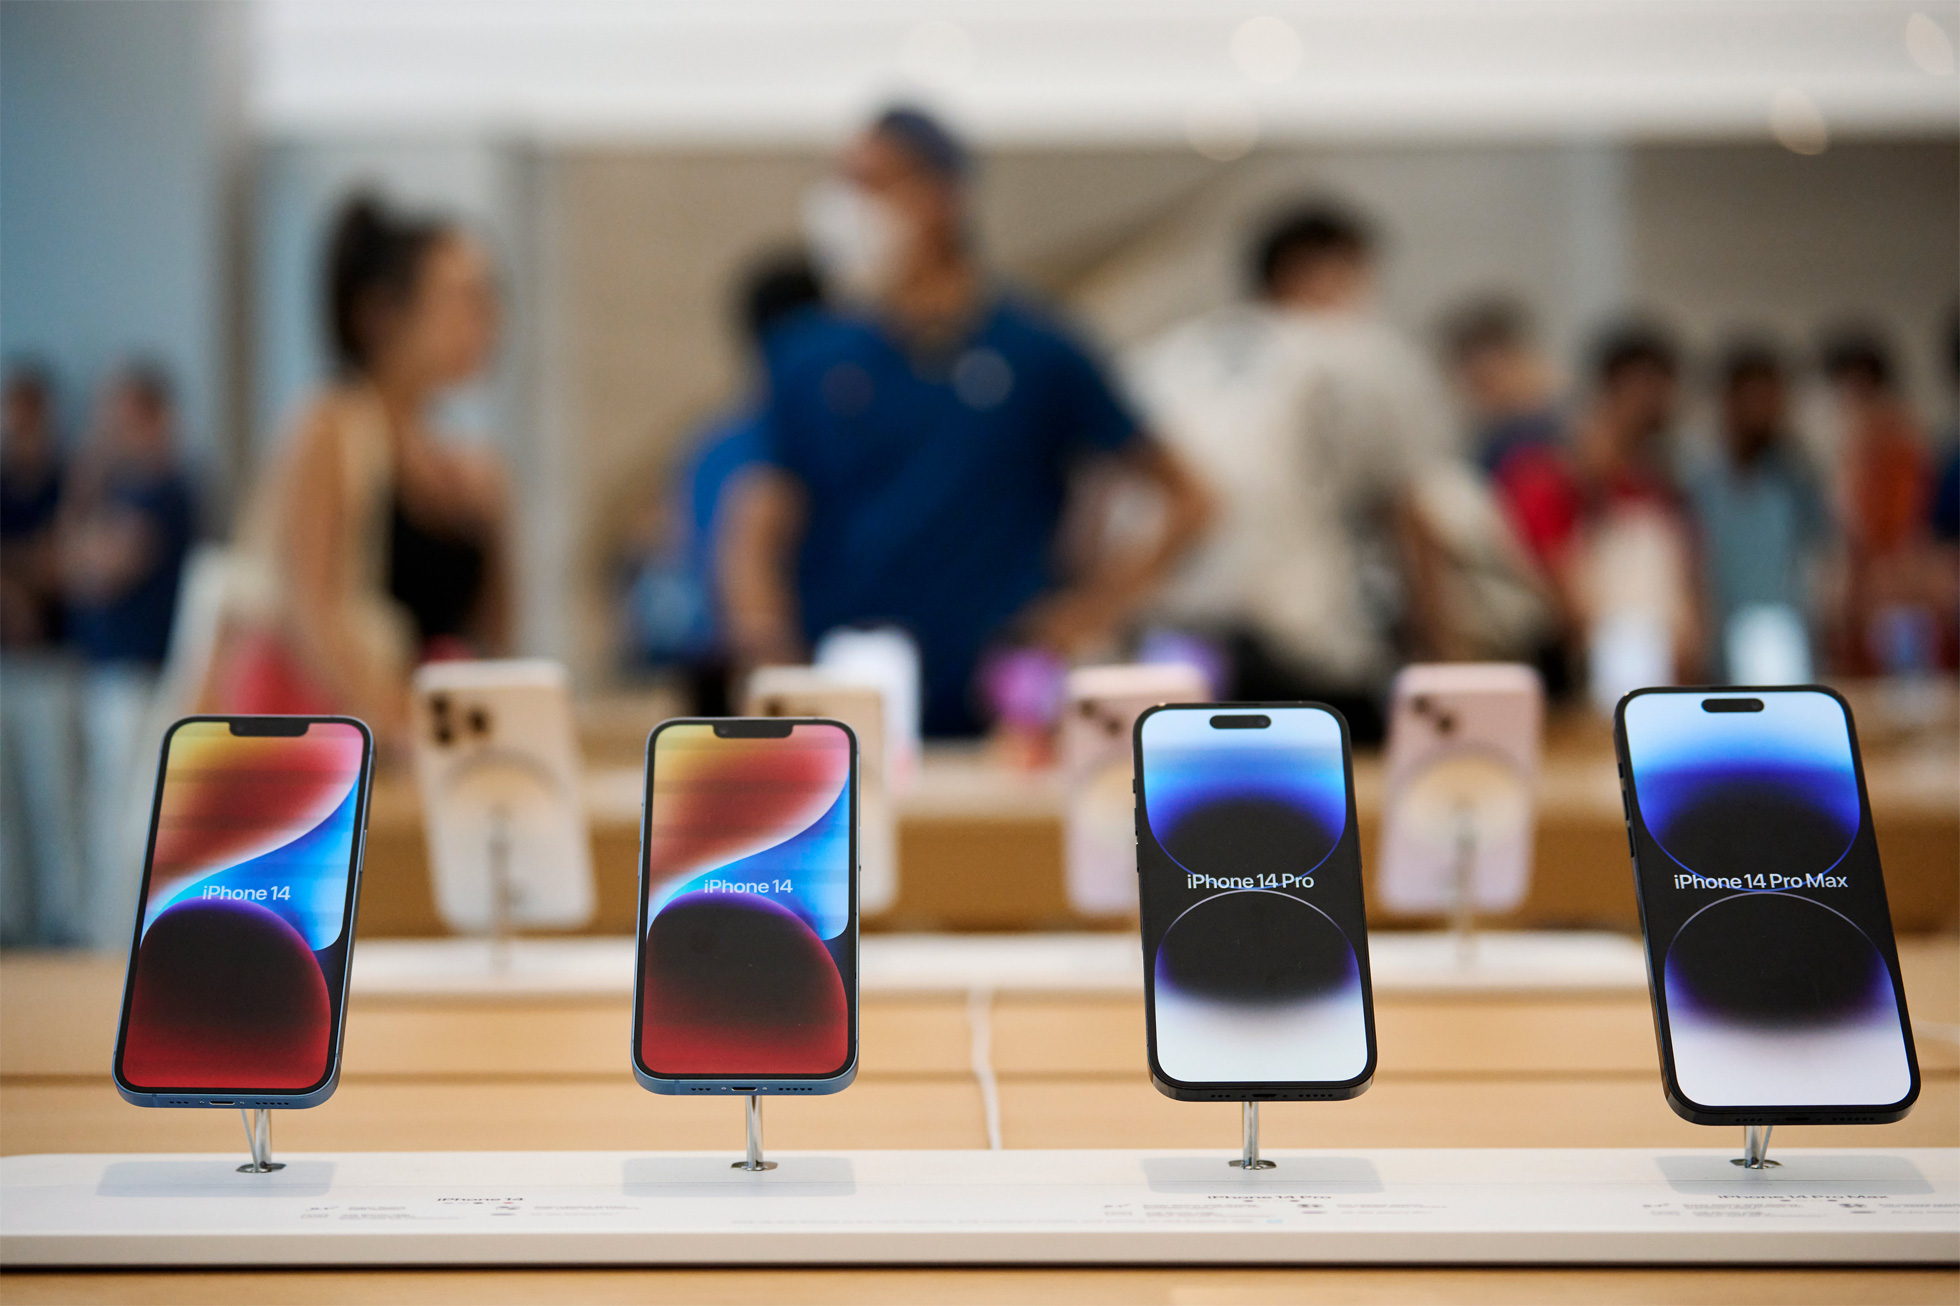 Apple-Orchard-Road-Singapore-iPhone-14-lineup-220916.jpg